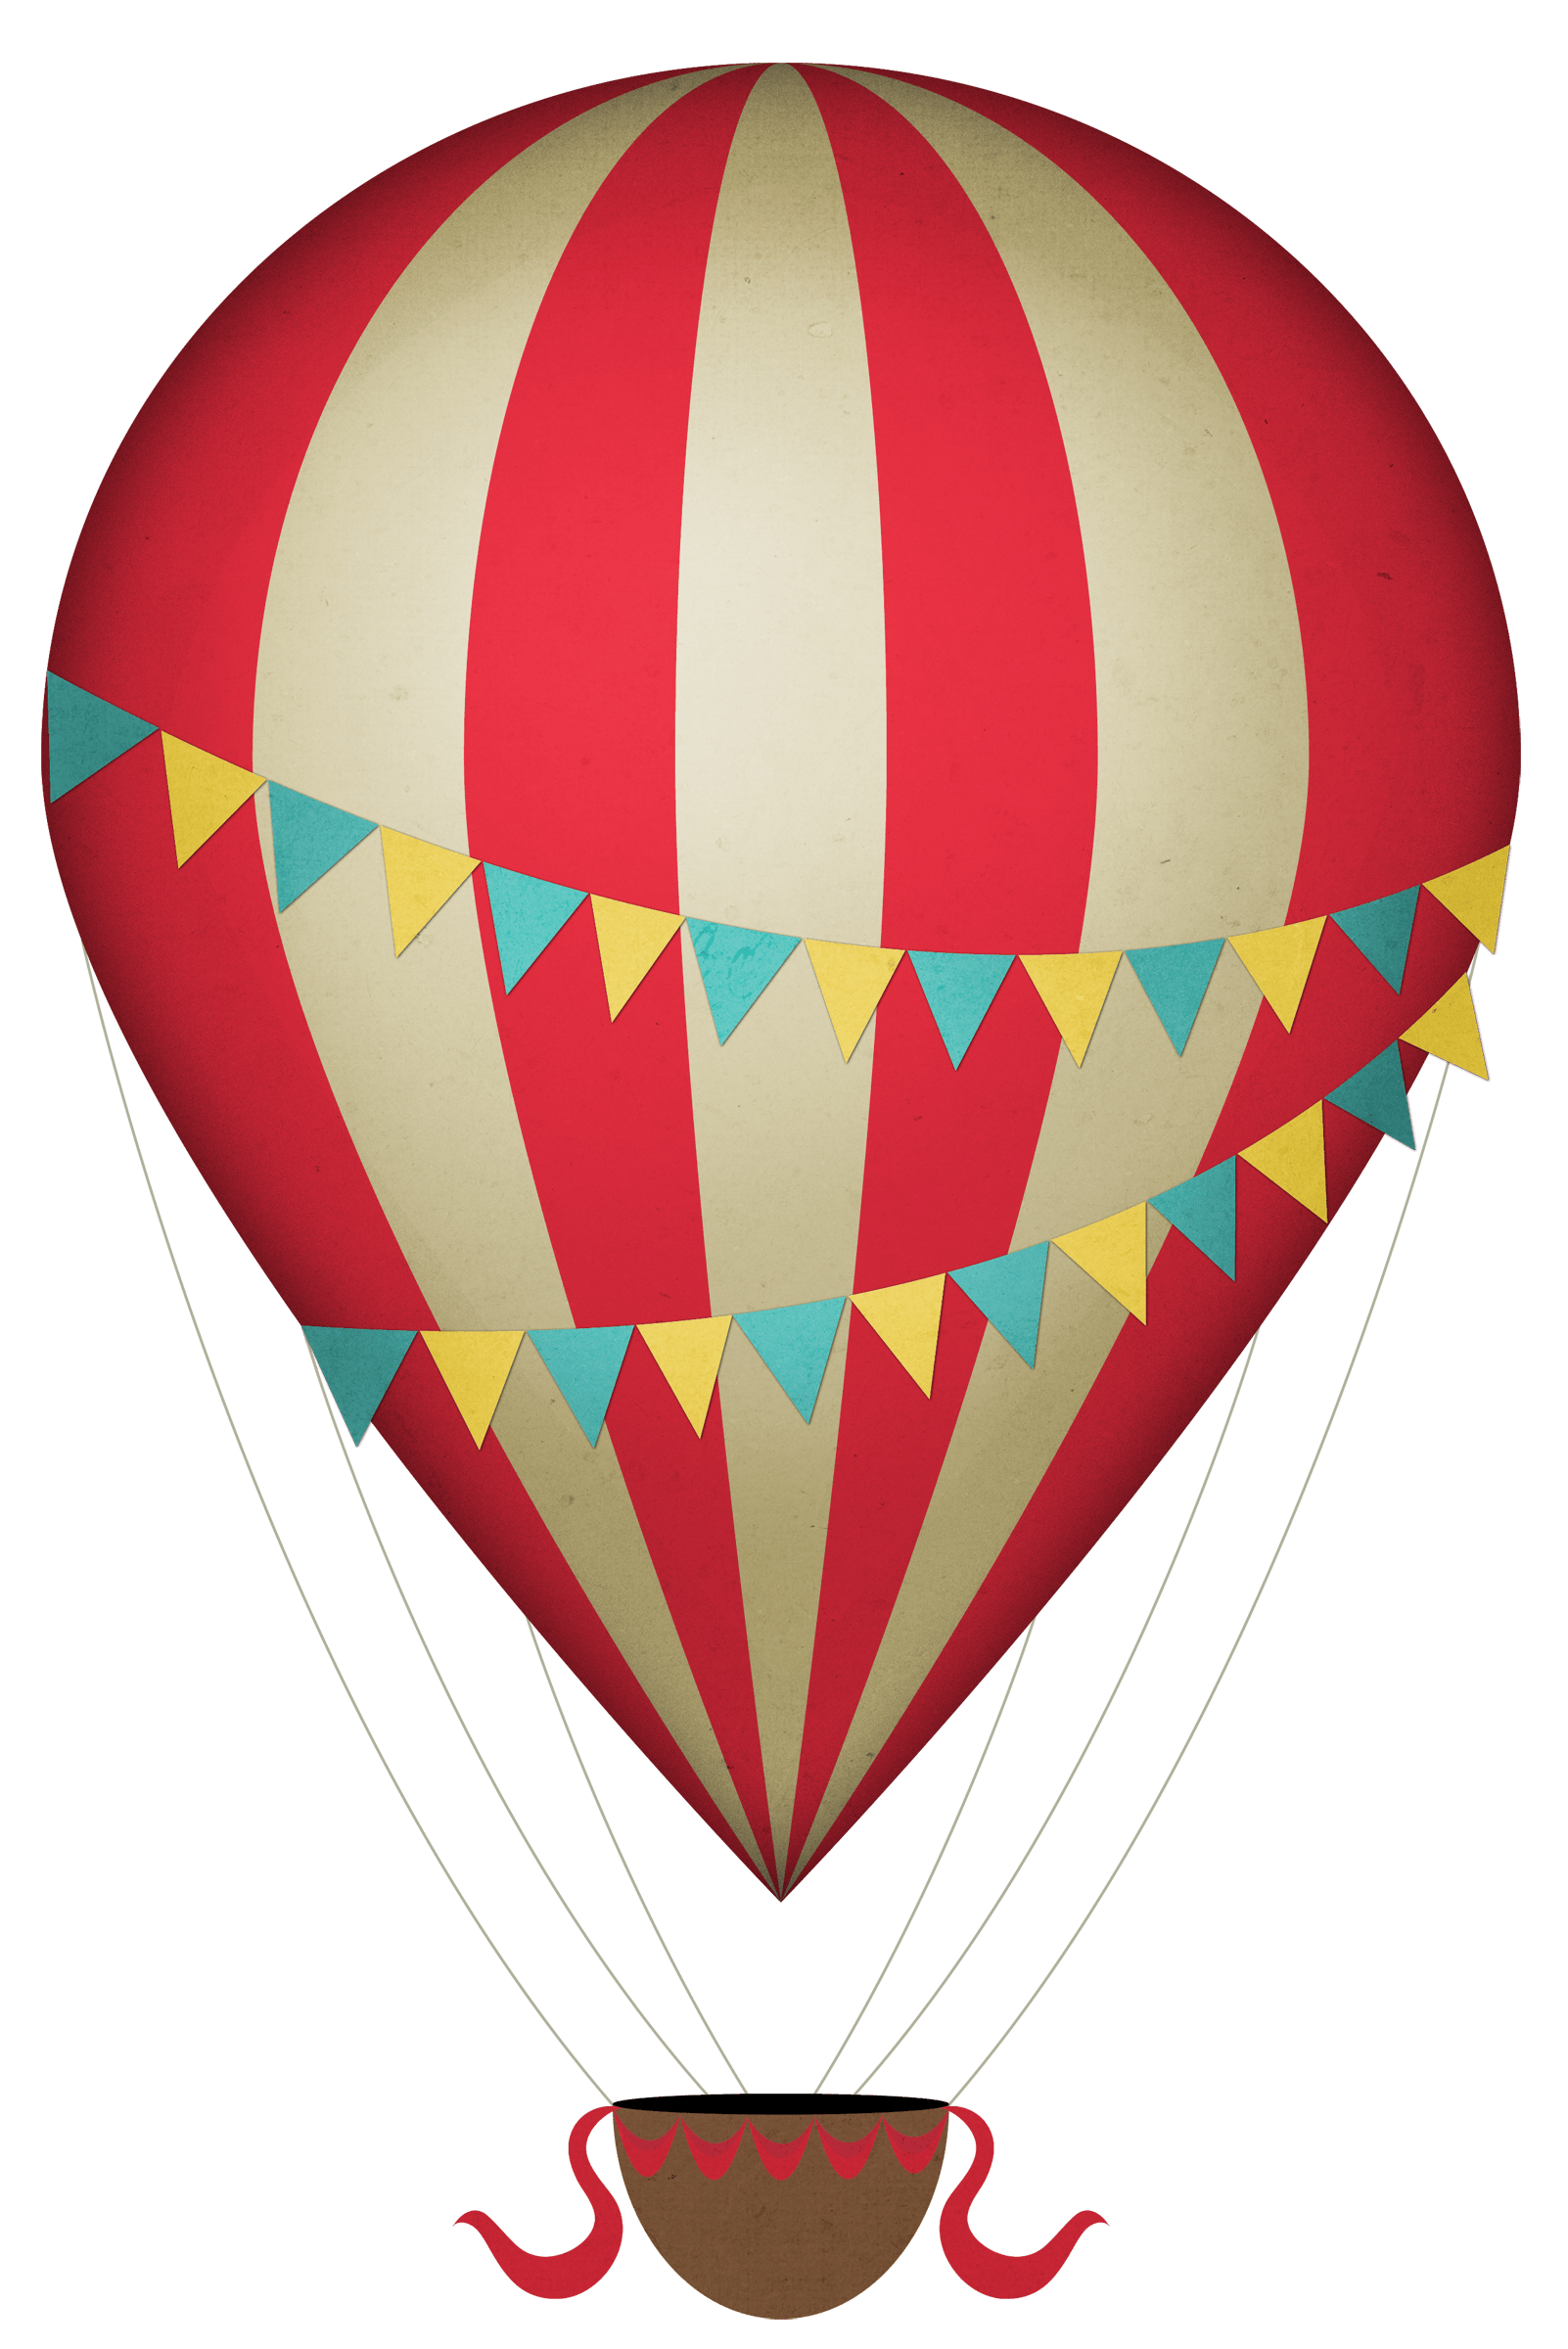 Free Hot Air Balloon Clipart, Download Free Hot Air Balloon Clipart png